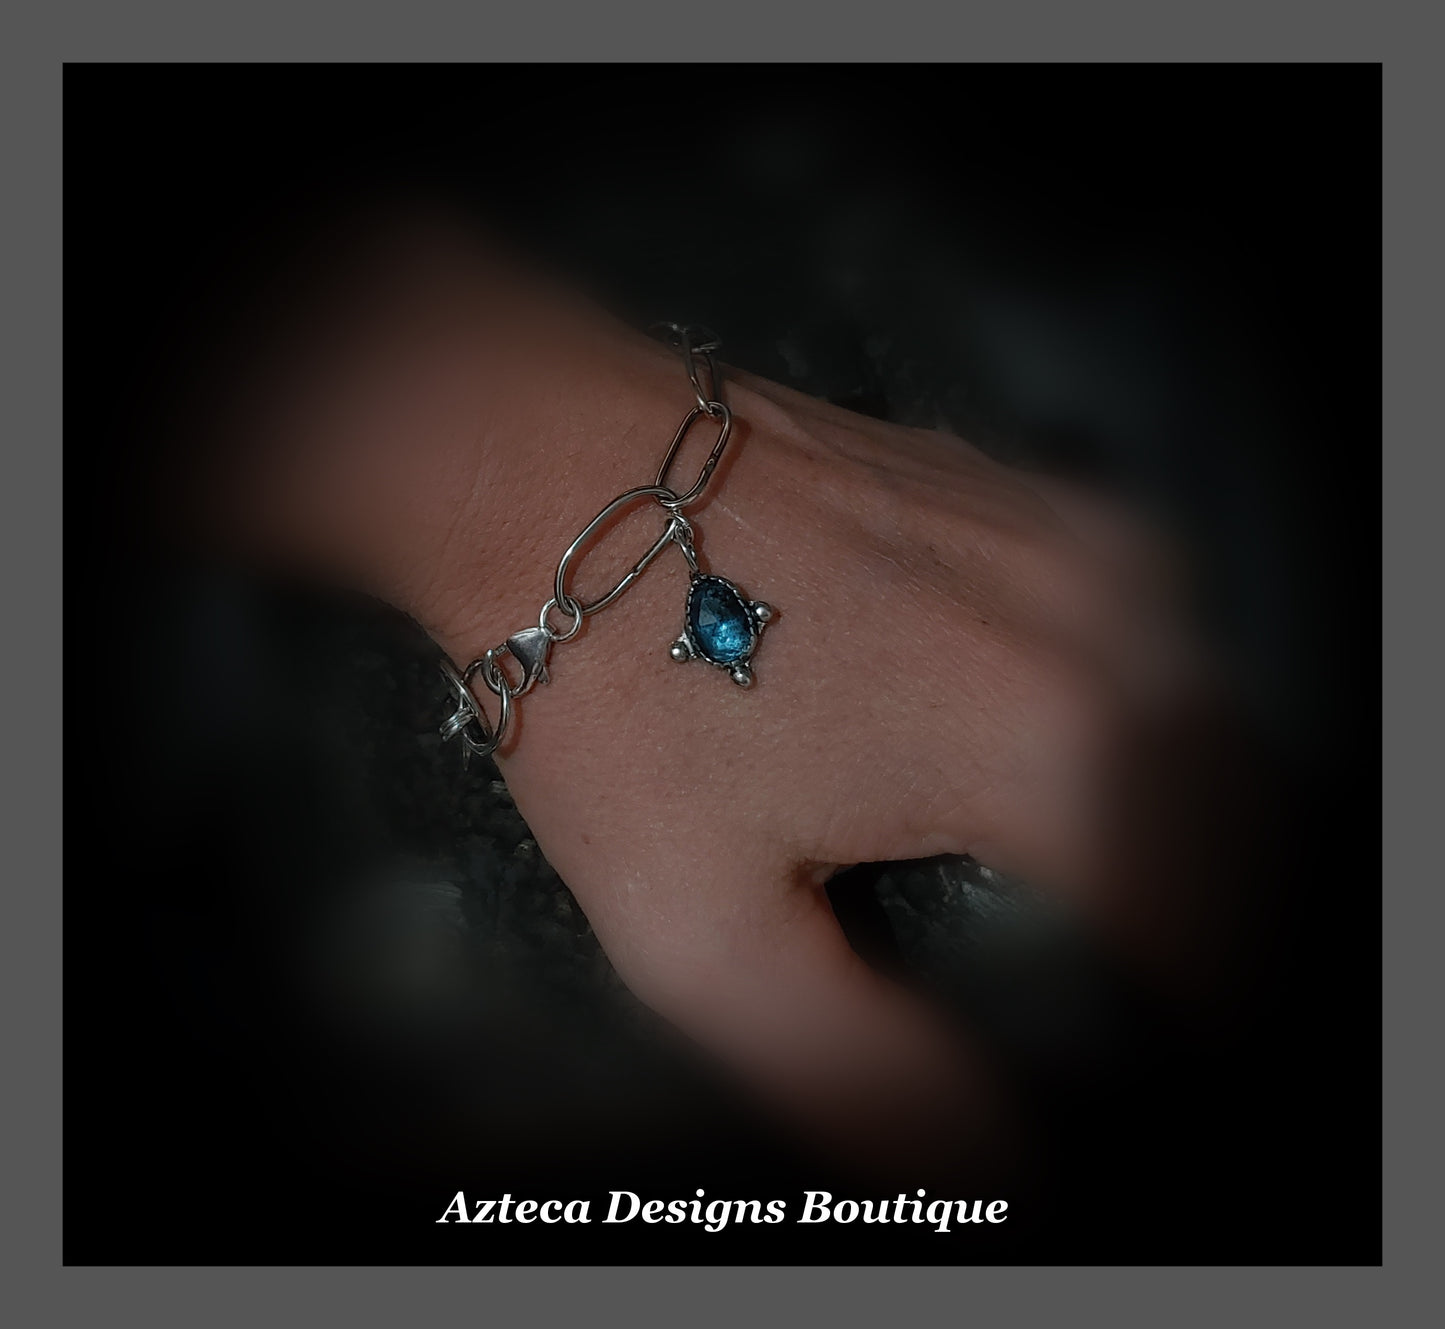 Teal Kyanite + Hand Fabricated Oval Link Chain + Argentium Silver Charm Bracelet